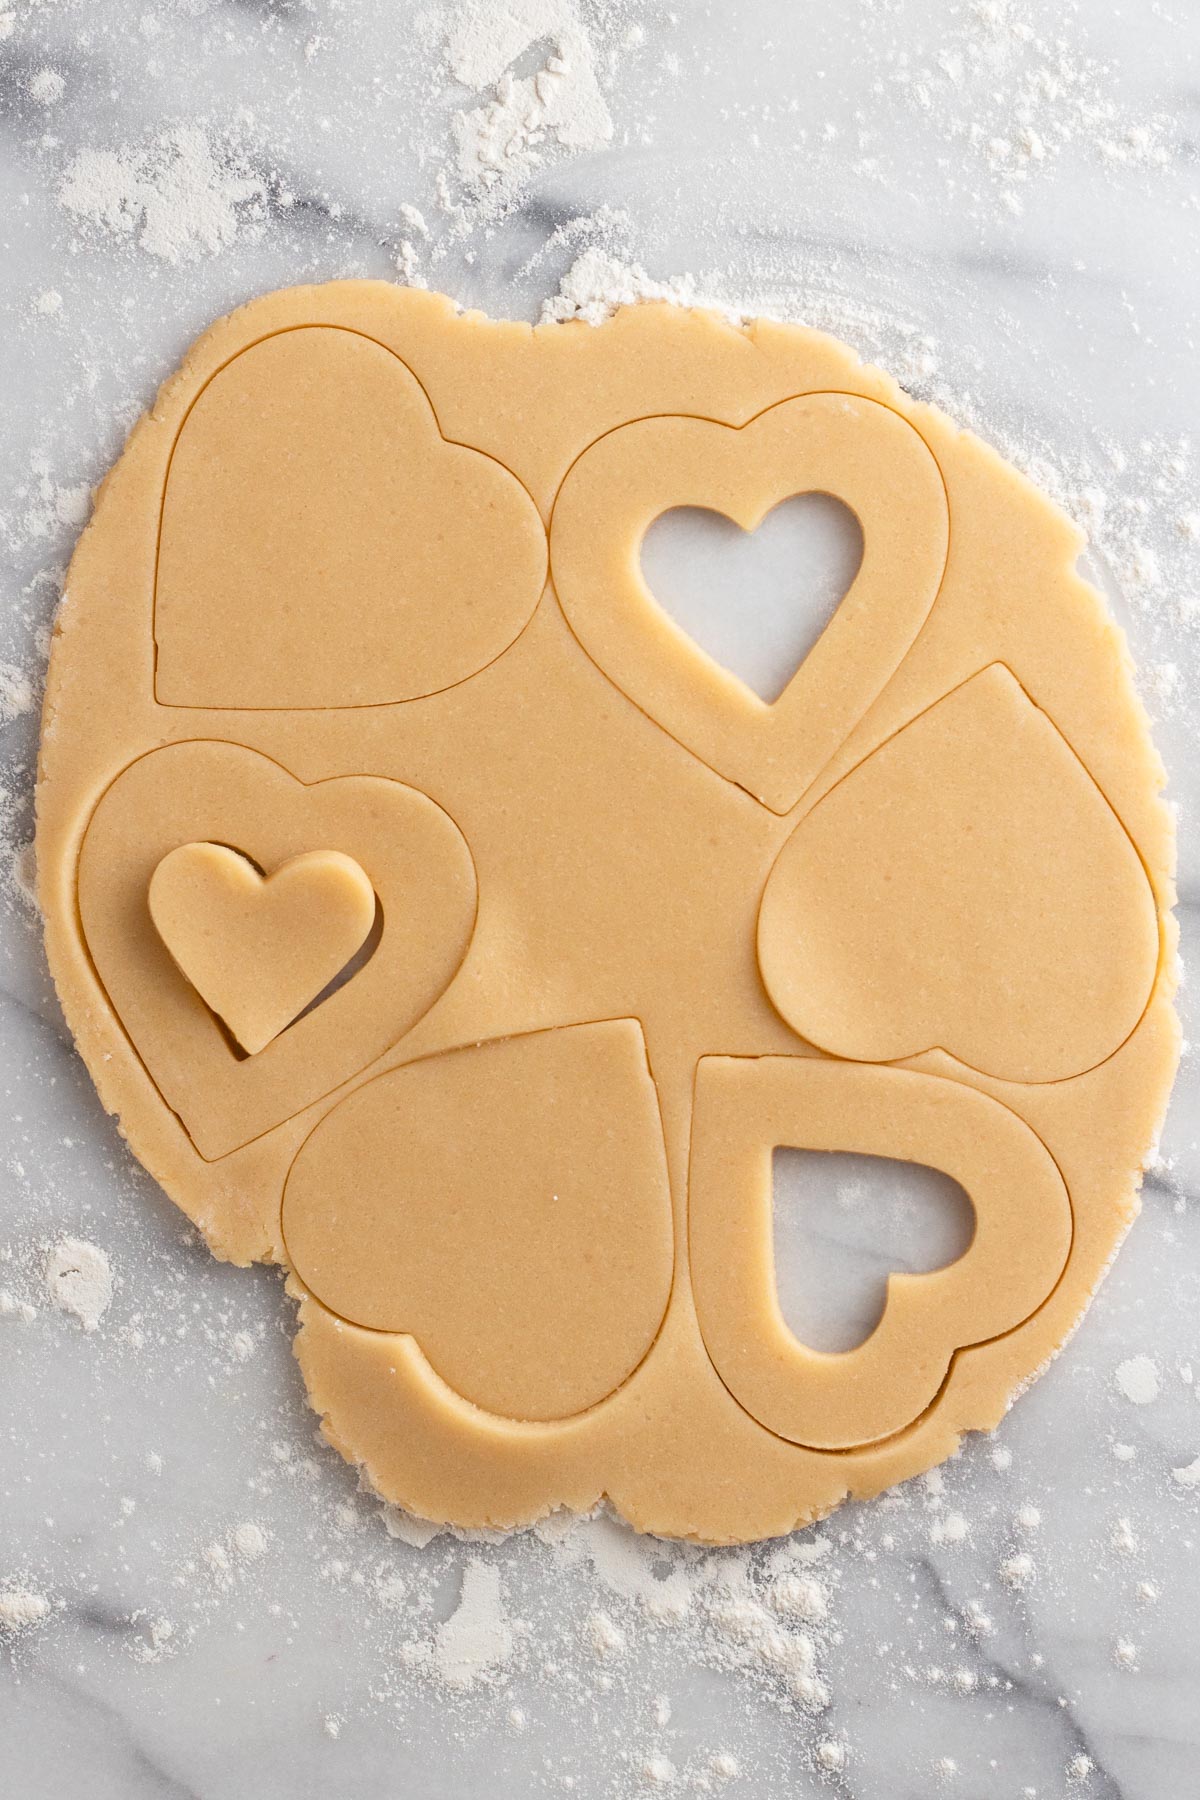 Rolled out cookie dough on a marble surface with heart shapes cut out.